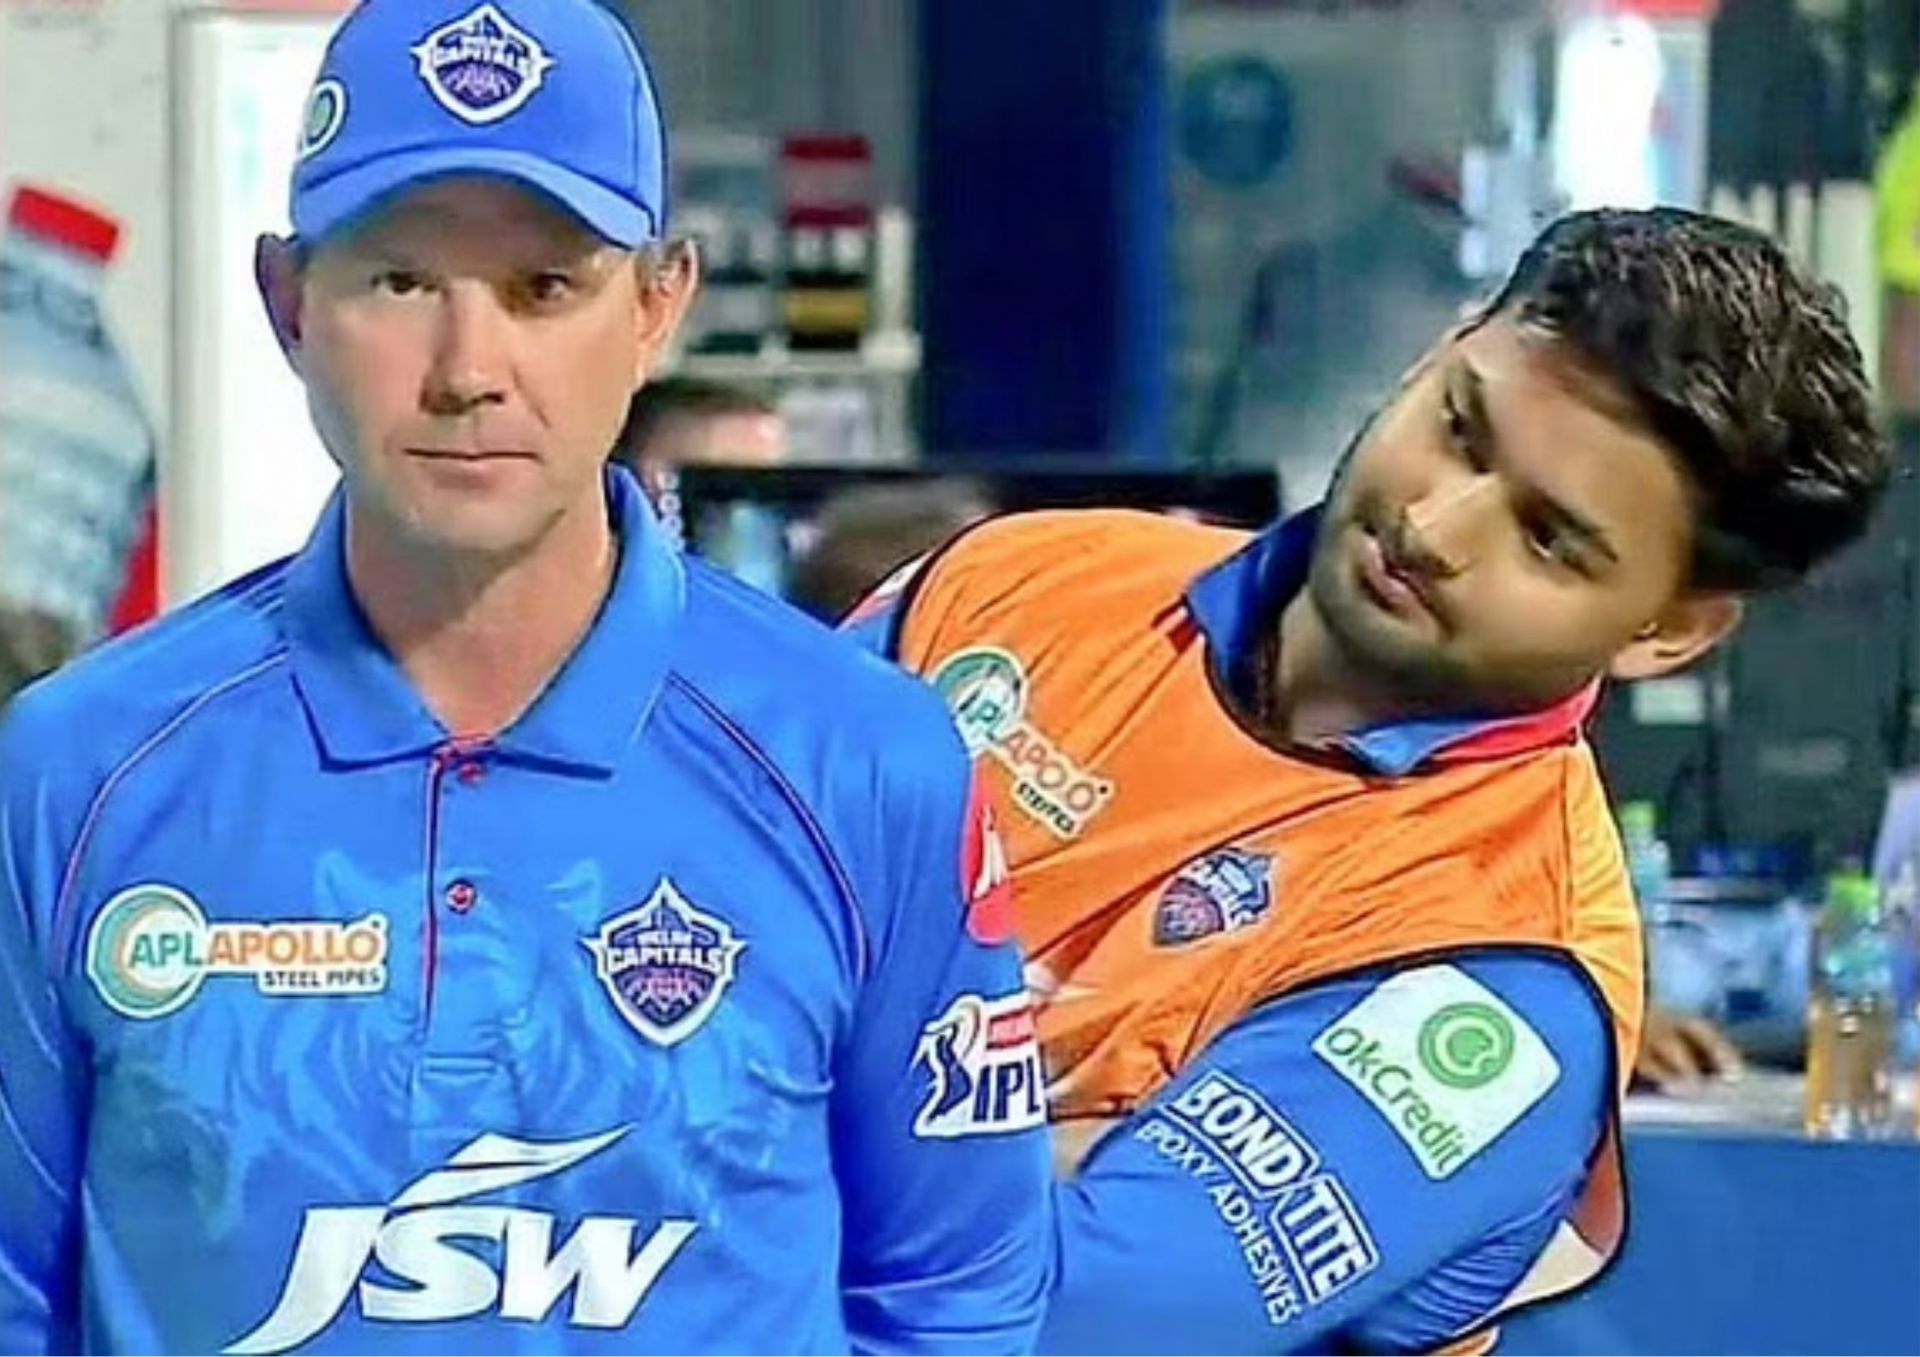 Ricky Ponting and Rishabh Pant work together in the IPL at the Delhi Capitals (Picture Credits: The Quint).